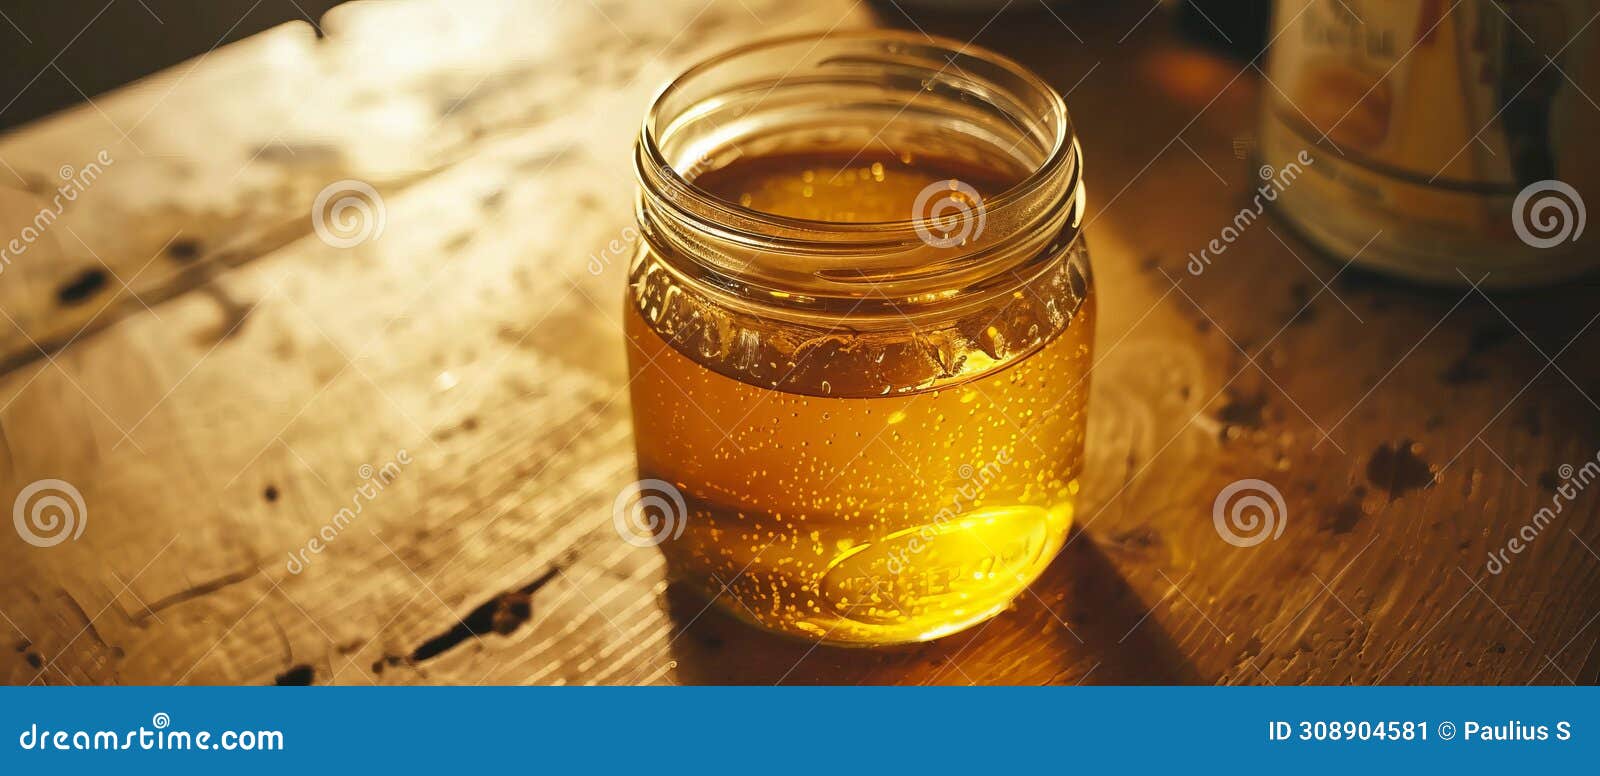 jar of delicious honey on the table, looks delicios